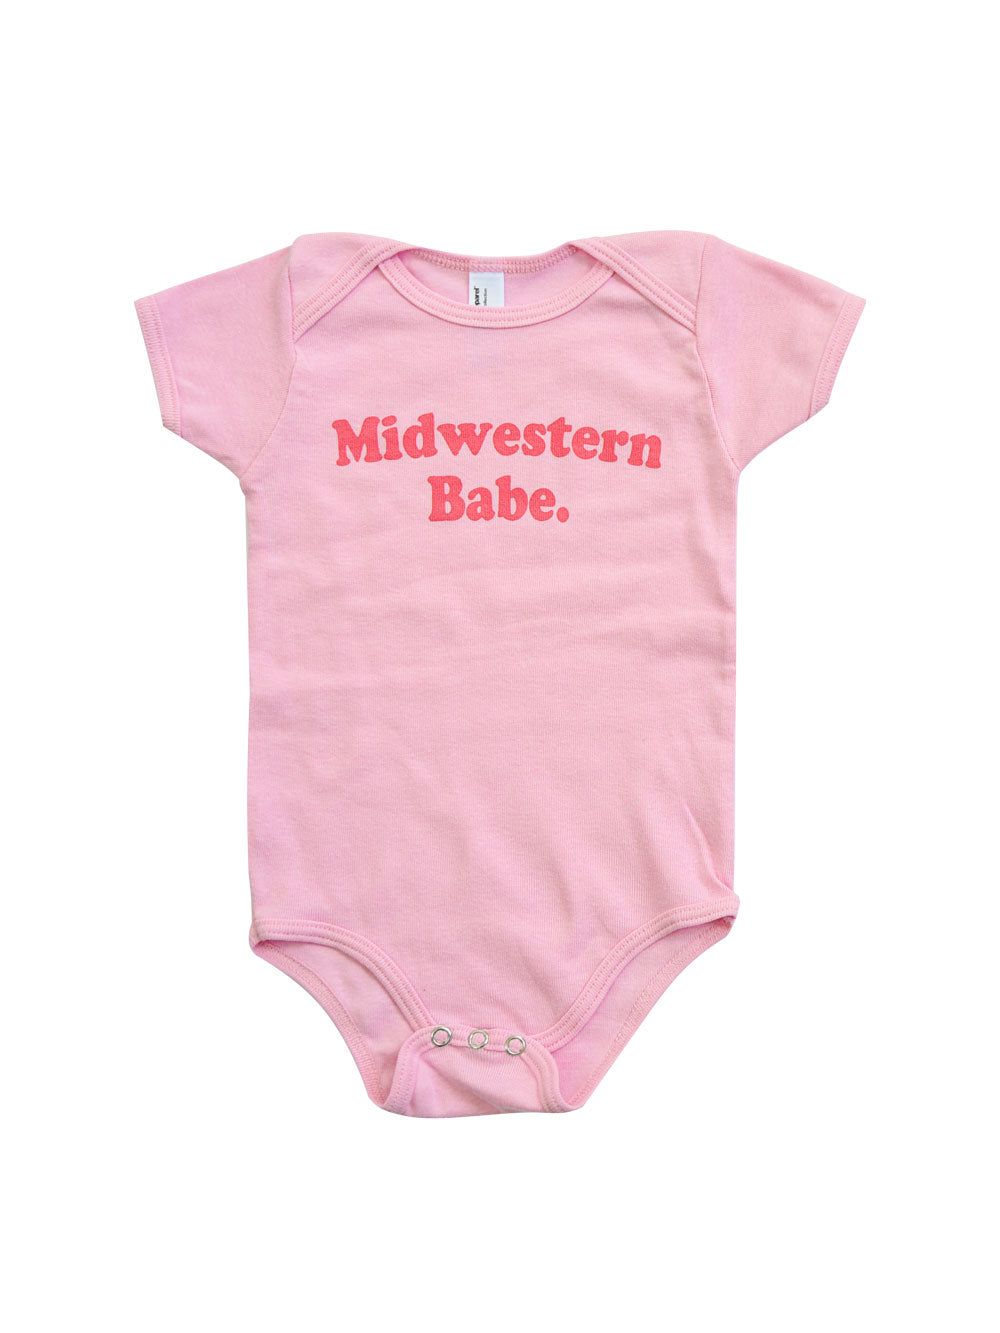 Midwestern Babe pink infant bodysuit